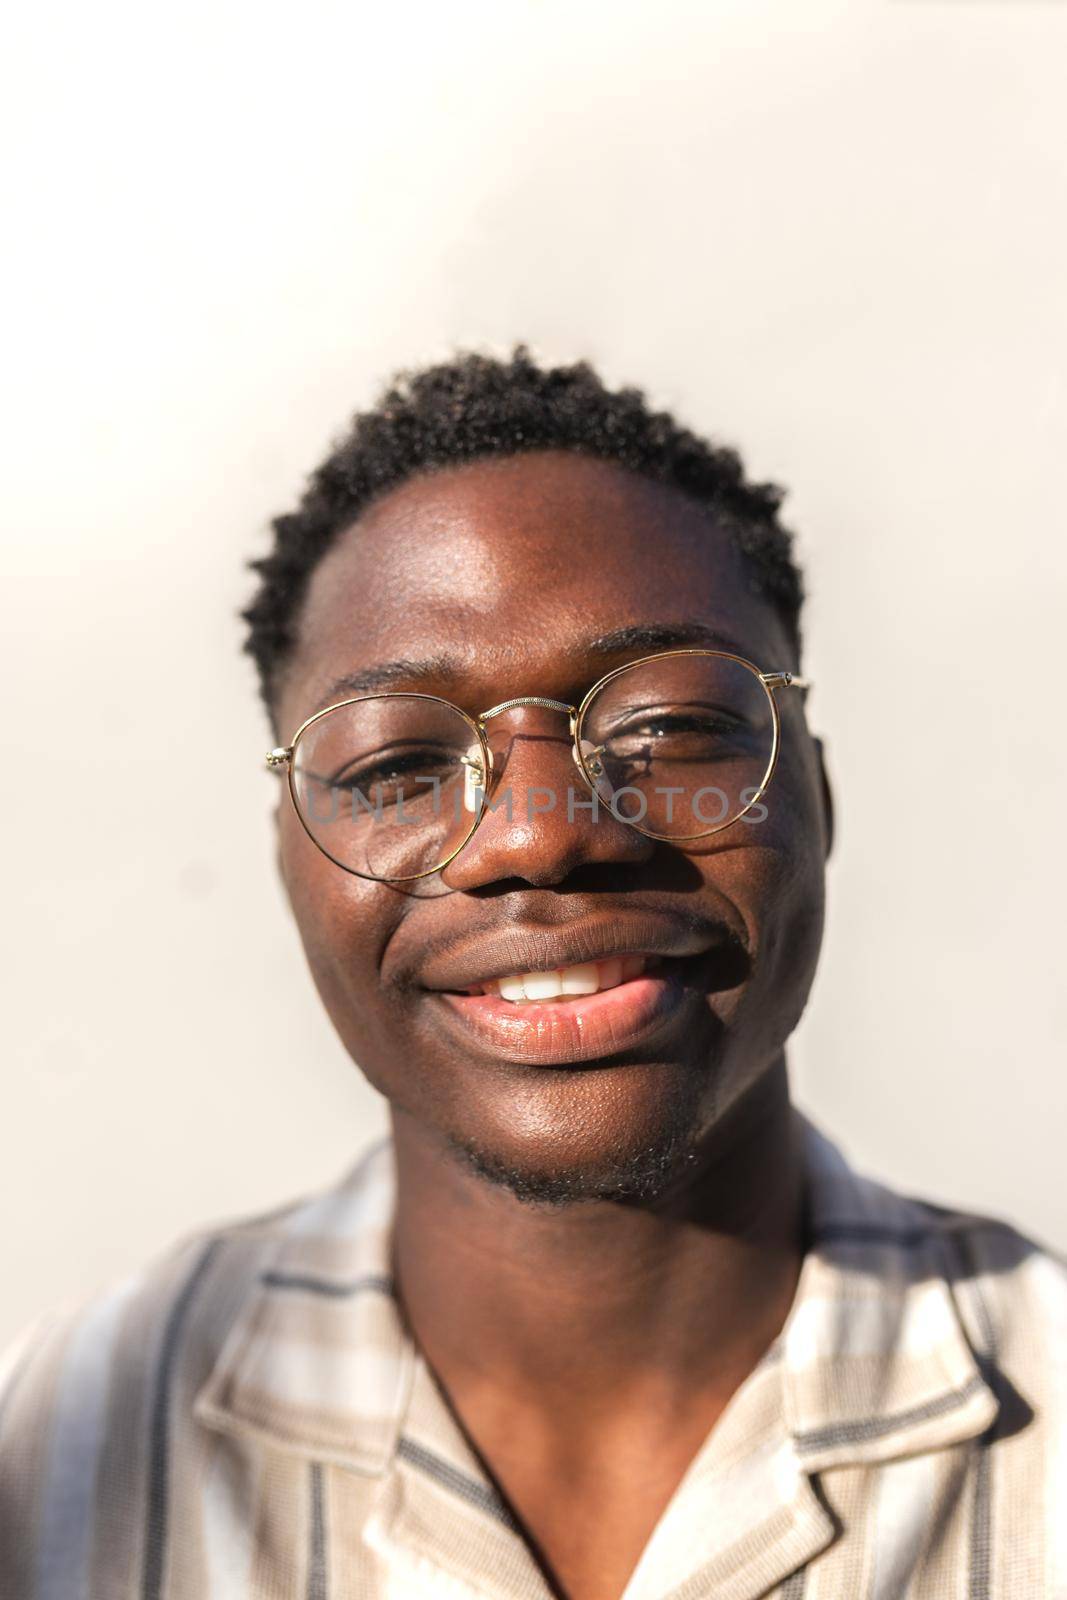 Vertical headshot of young happy and smiling black man wearing glasses outdoors. by Hoverstock